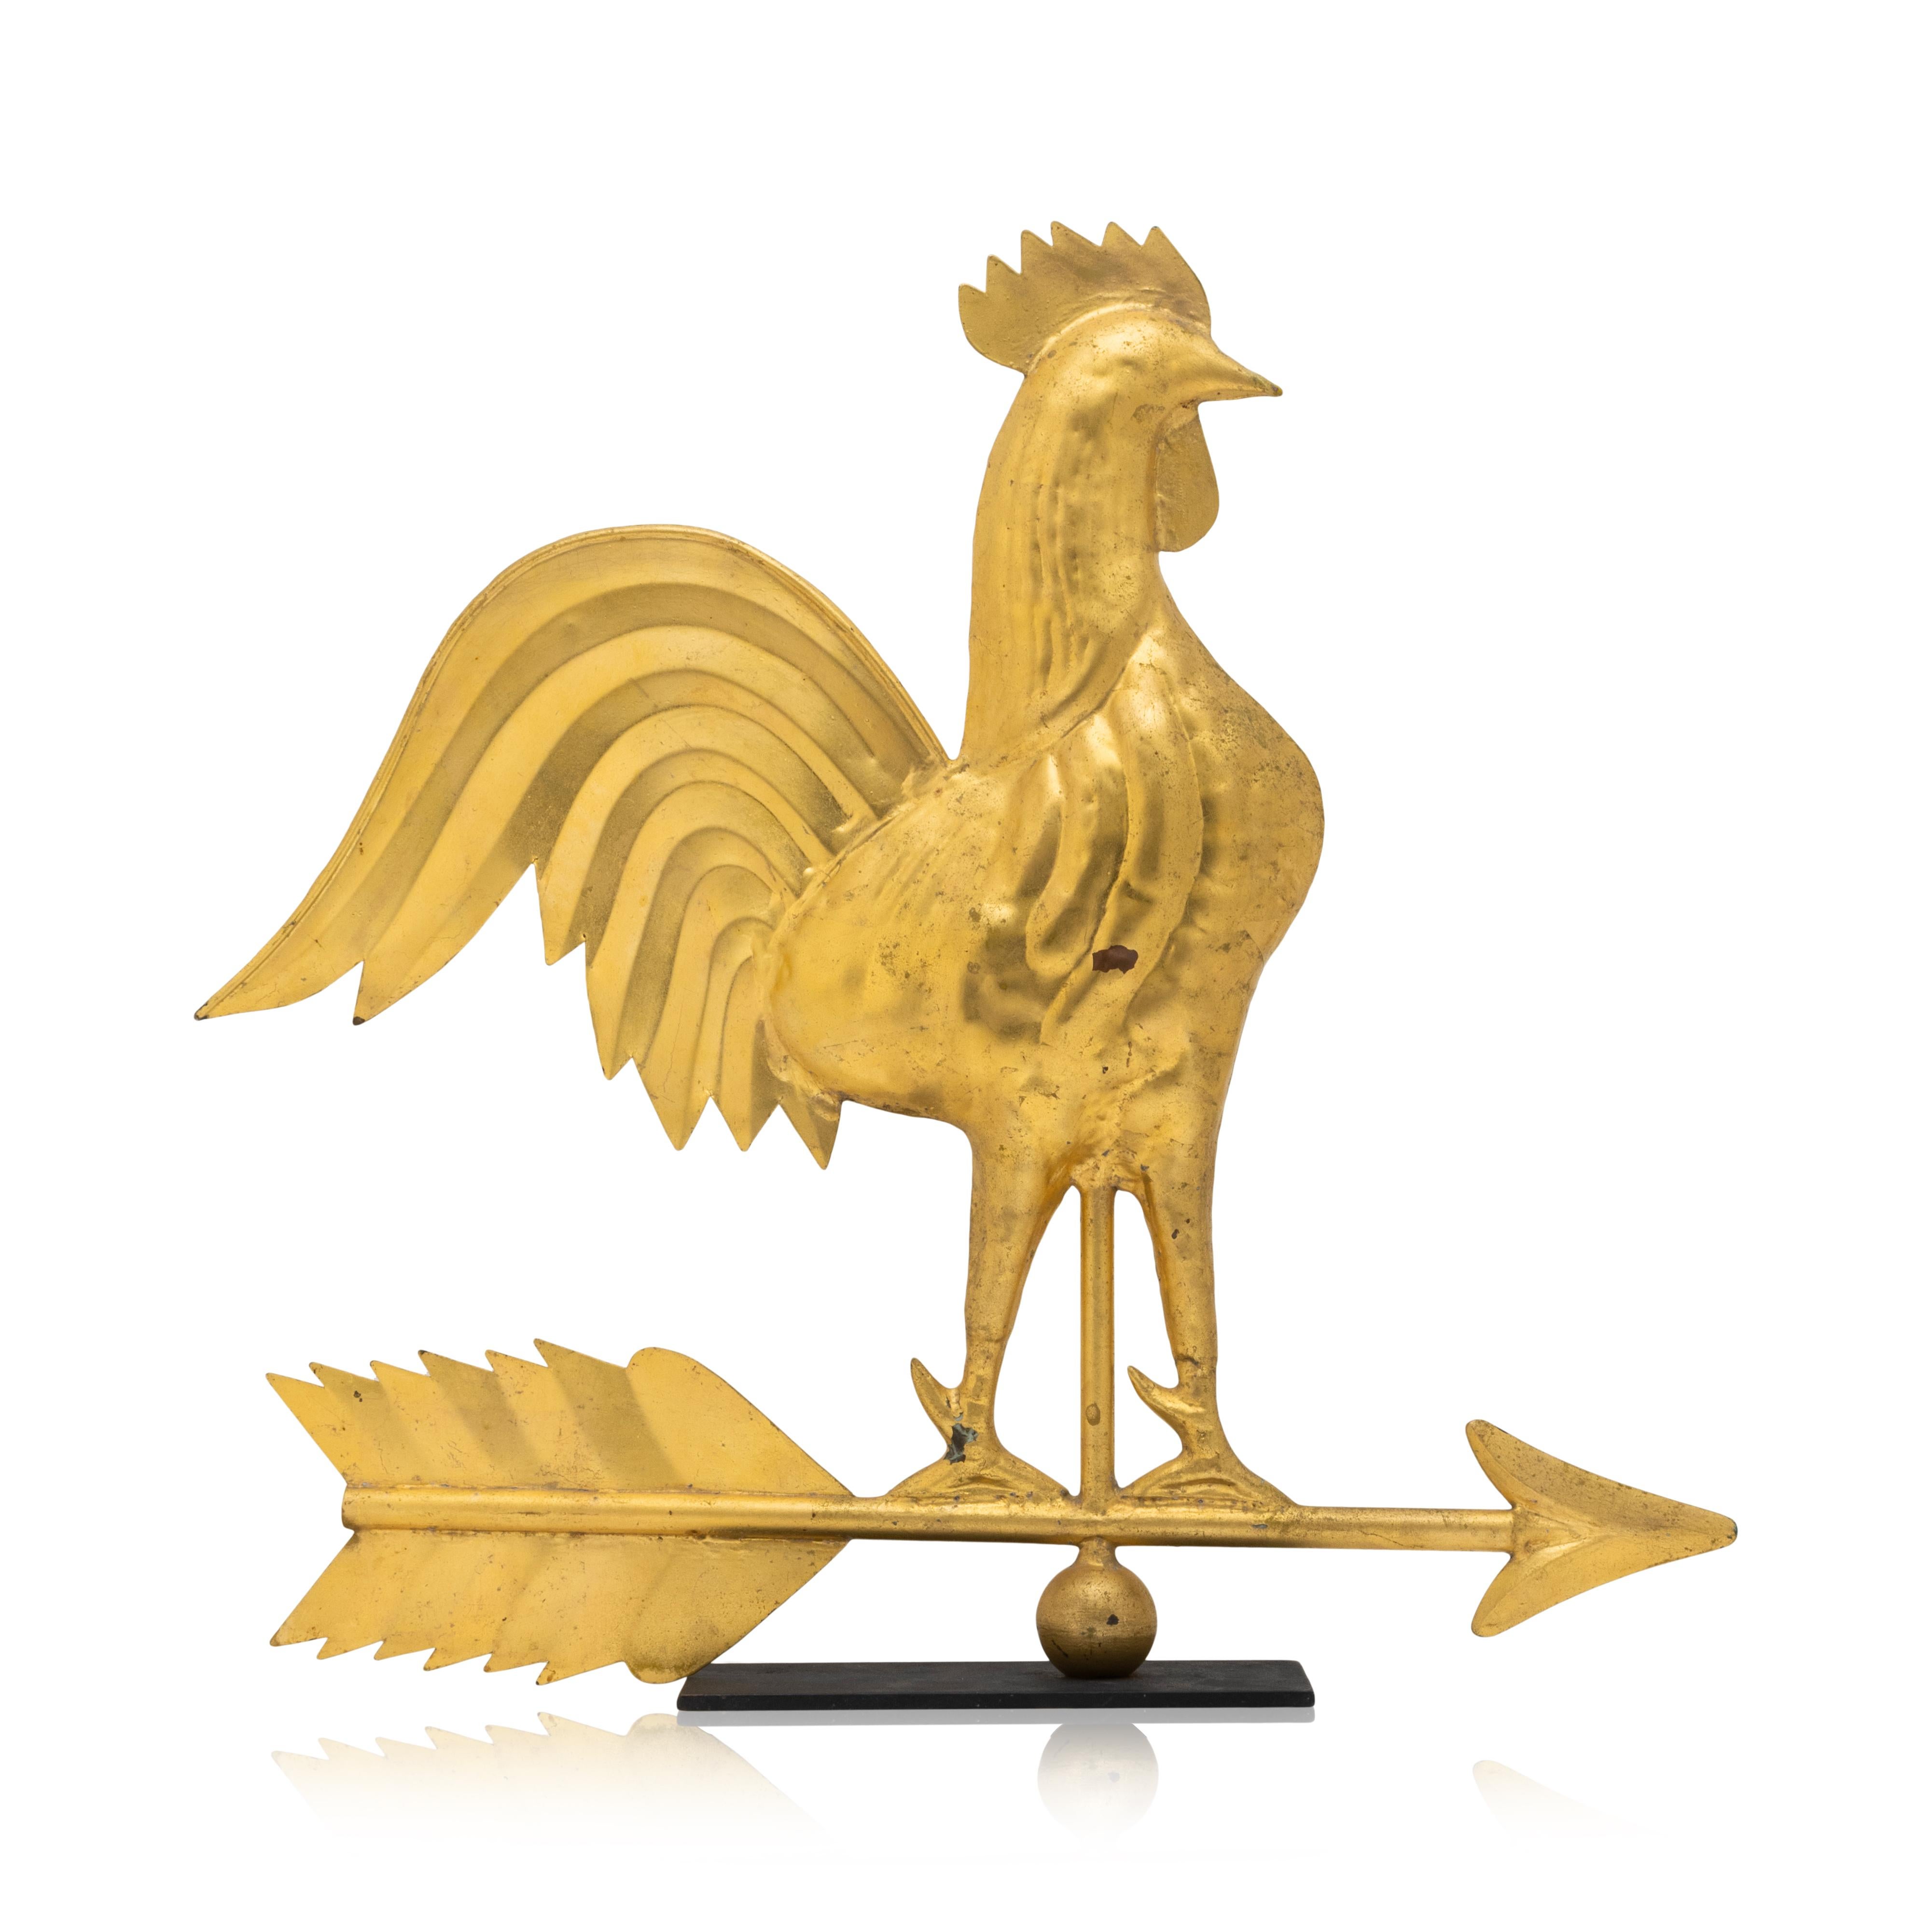 20th Century gilded swell bodied copper rooster weather vane on modern stand. Rooster standing atop a pointed directional. Nice bright copper age on slim black base. 24